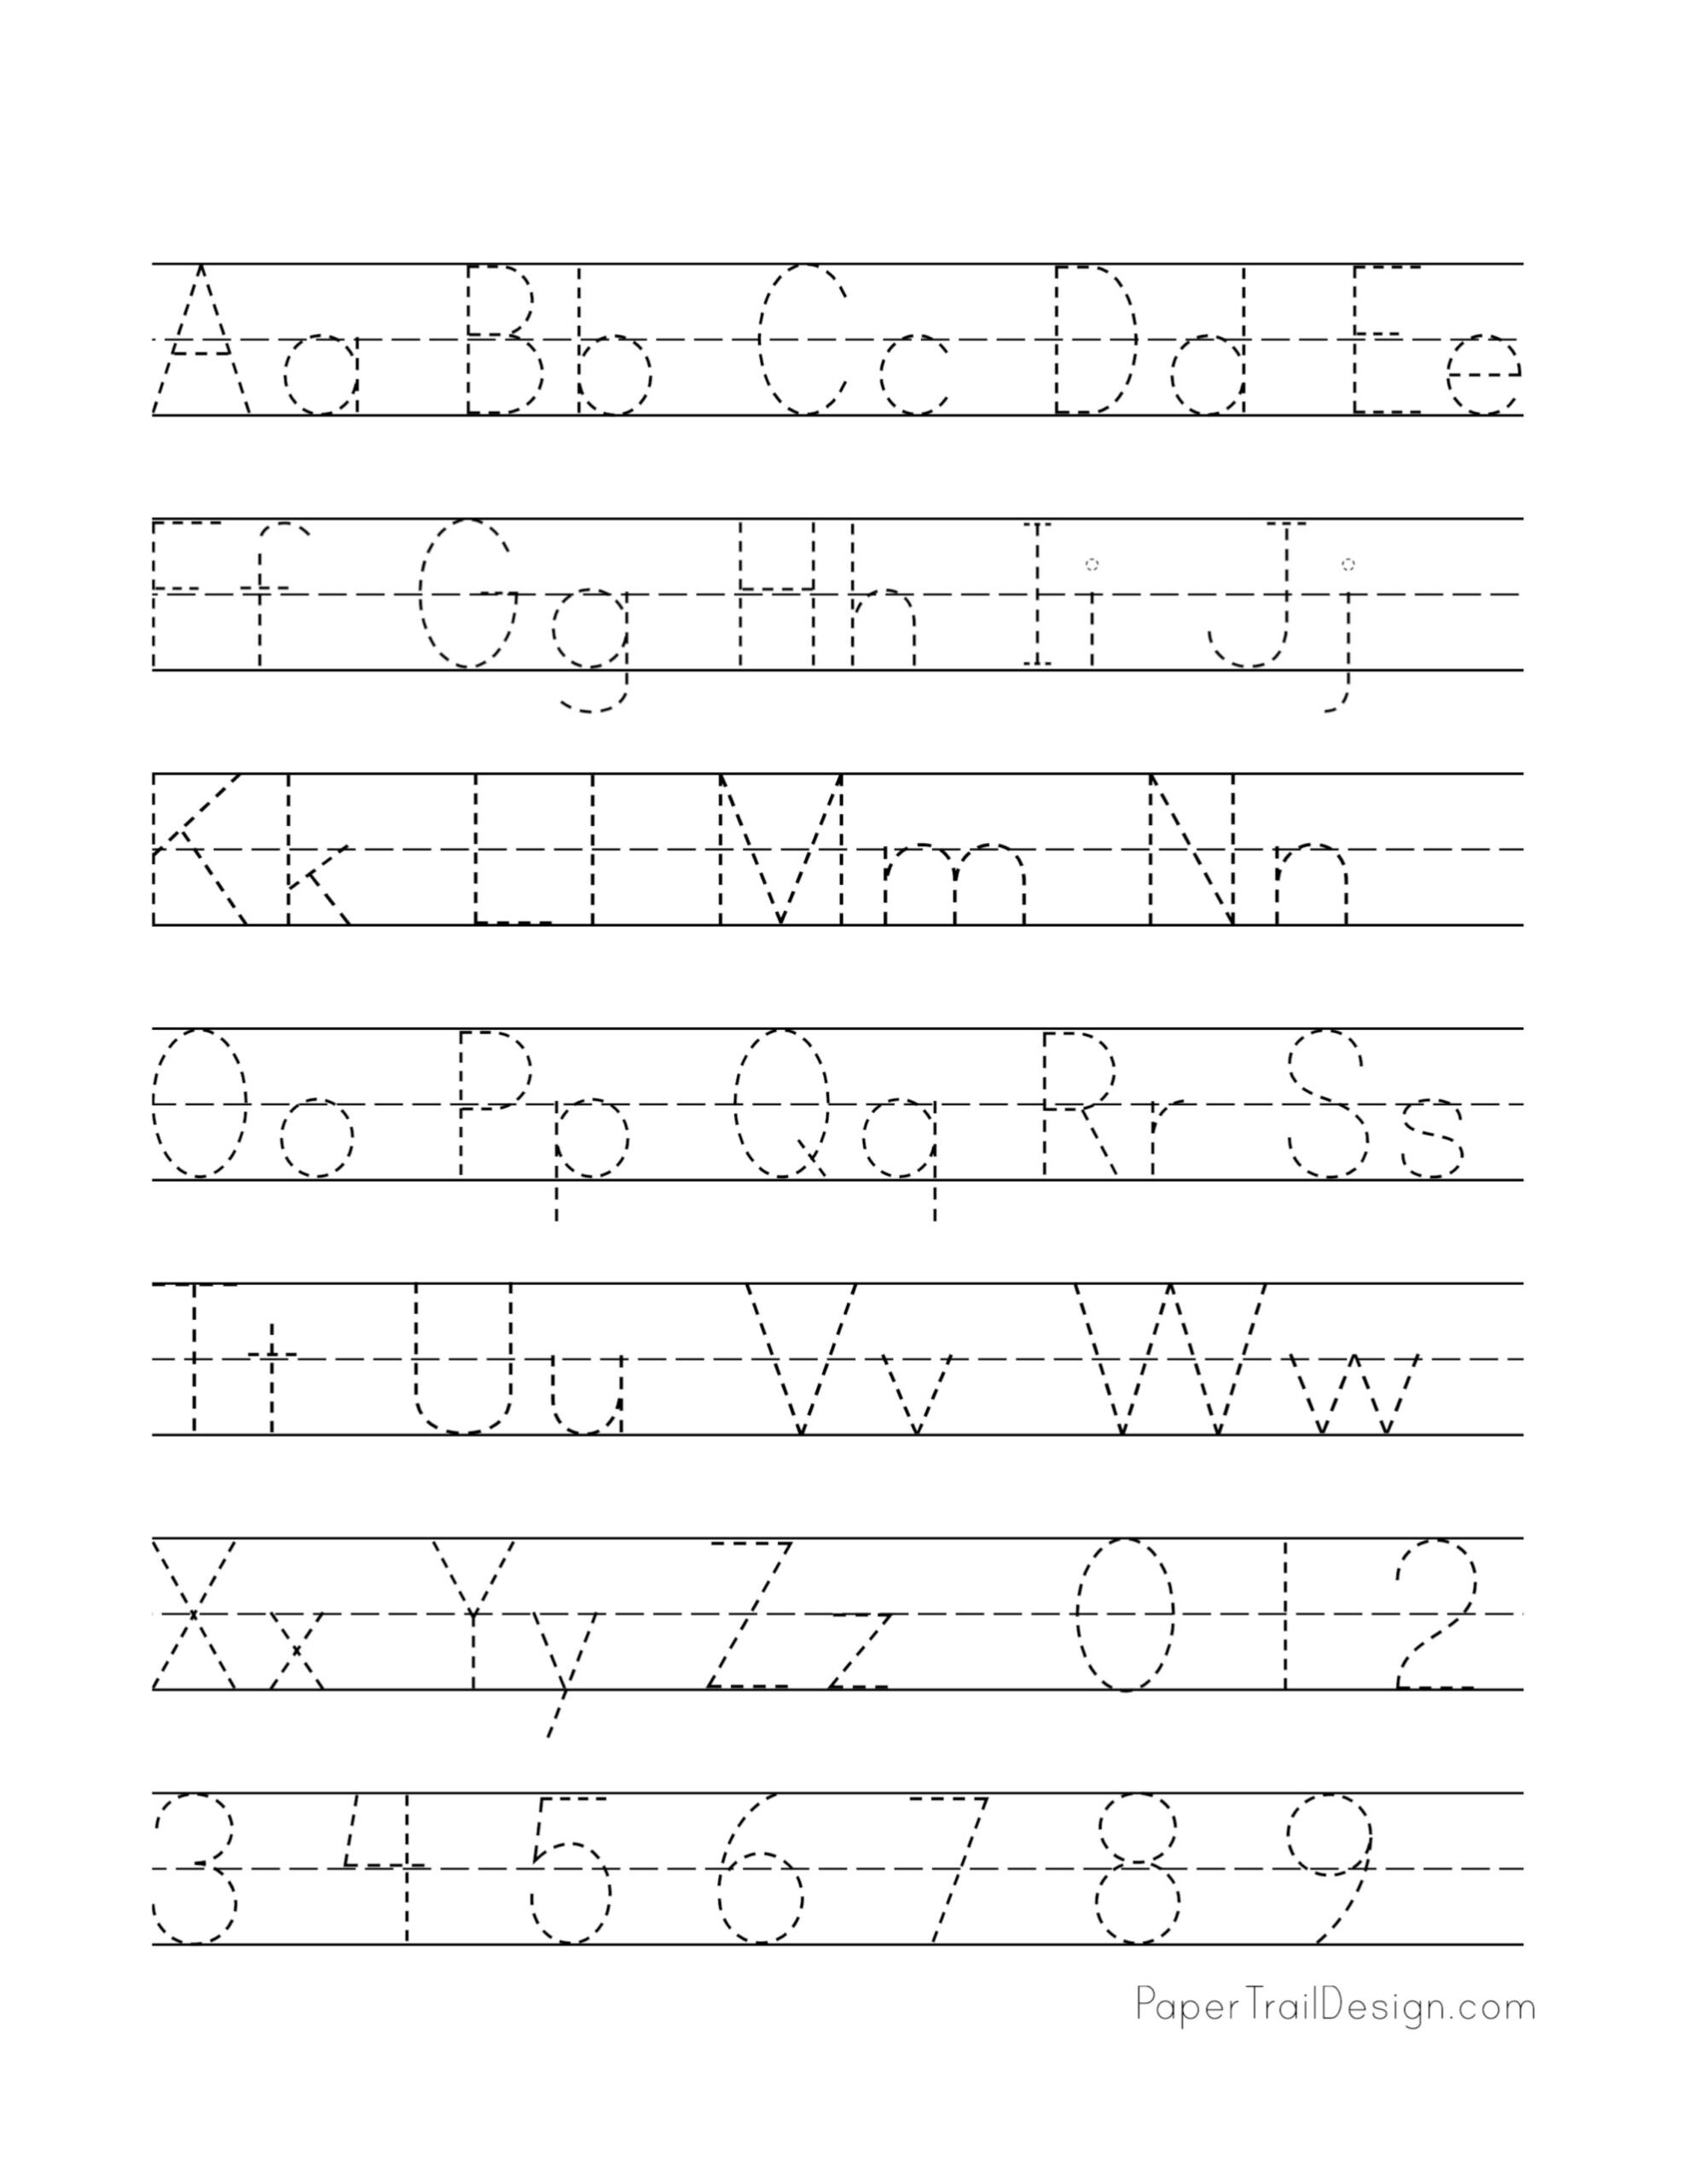 practice-writing-the-alphabet-worksheets-printable-worksheets